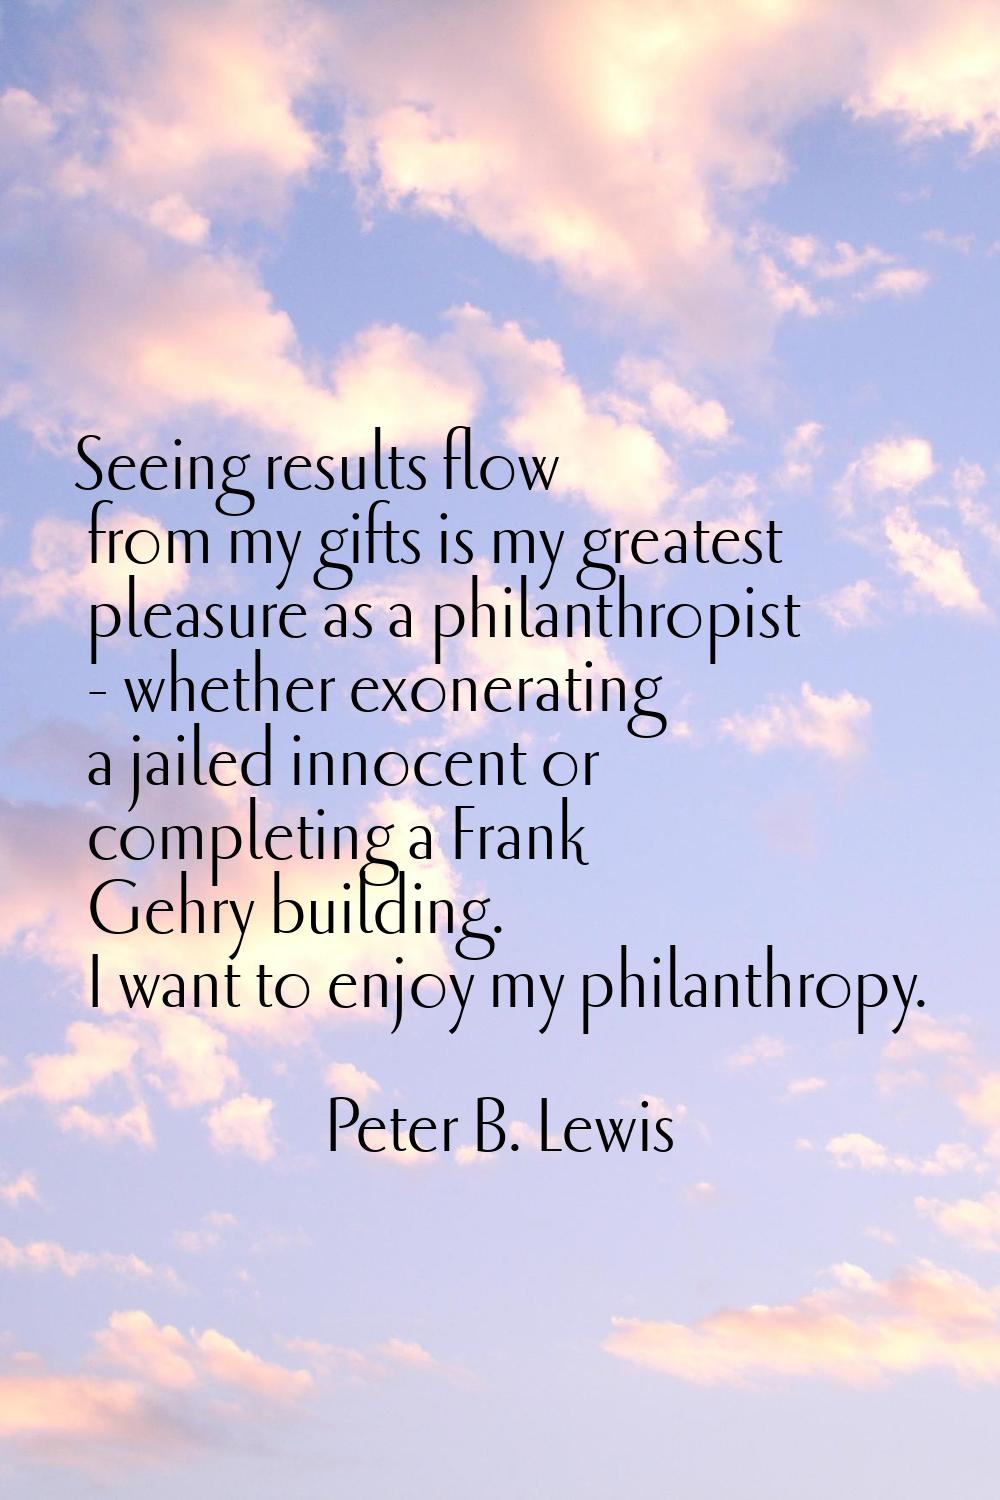 Seeing results flow from my gifts is my greatest pleasure as a philanthropist - whether exonerating